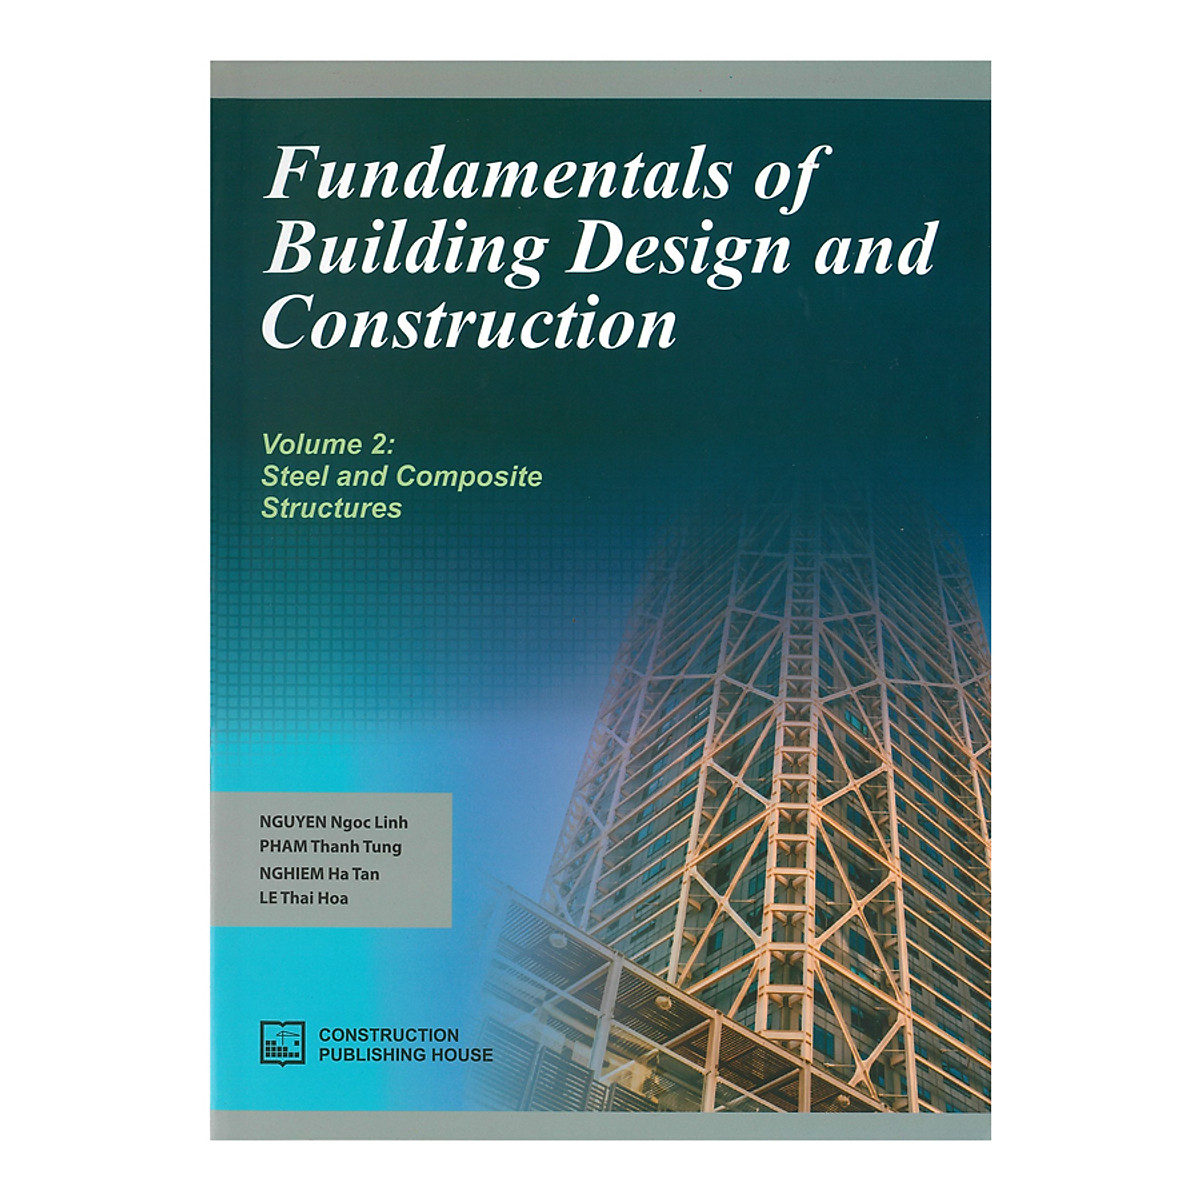 Fundamentals Of Building Design And Construction - Volume 2: Steel & Composite Structures